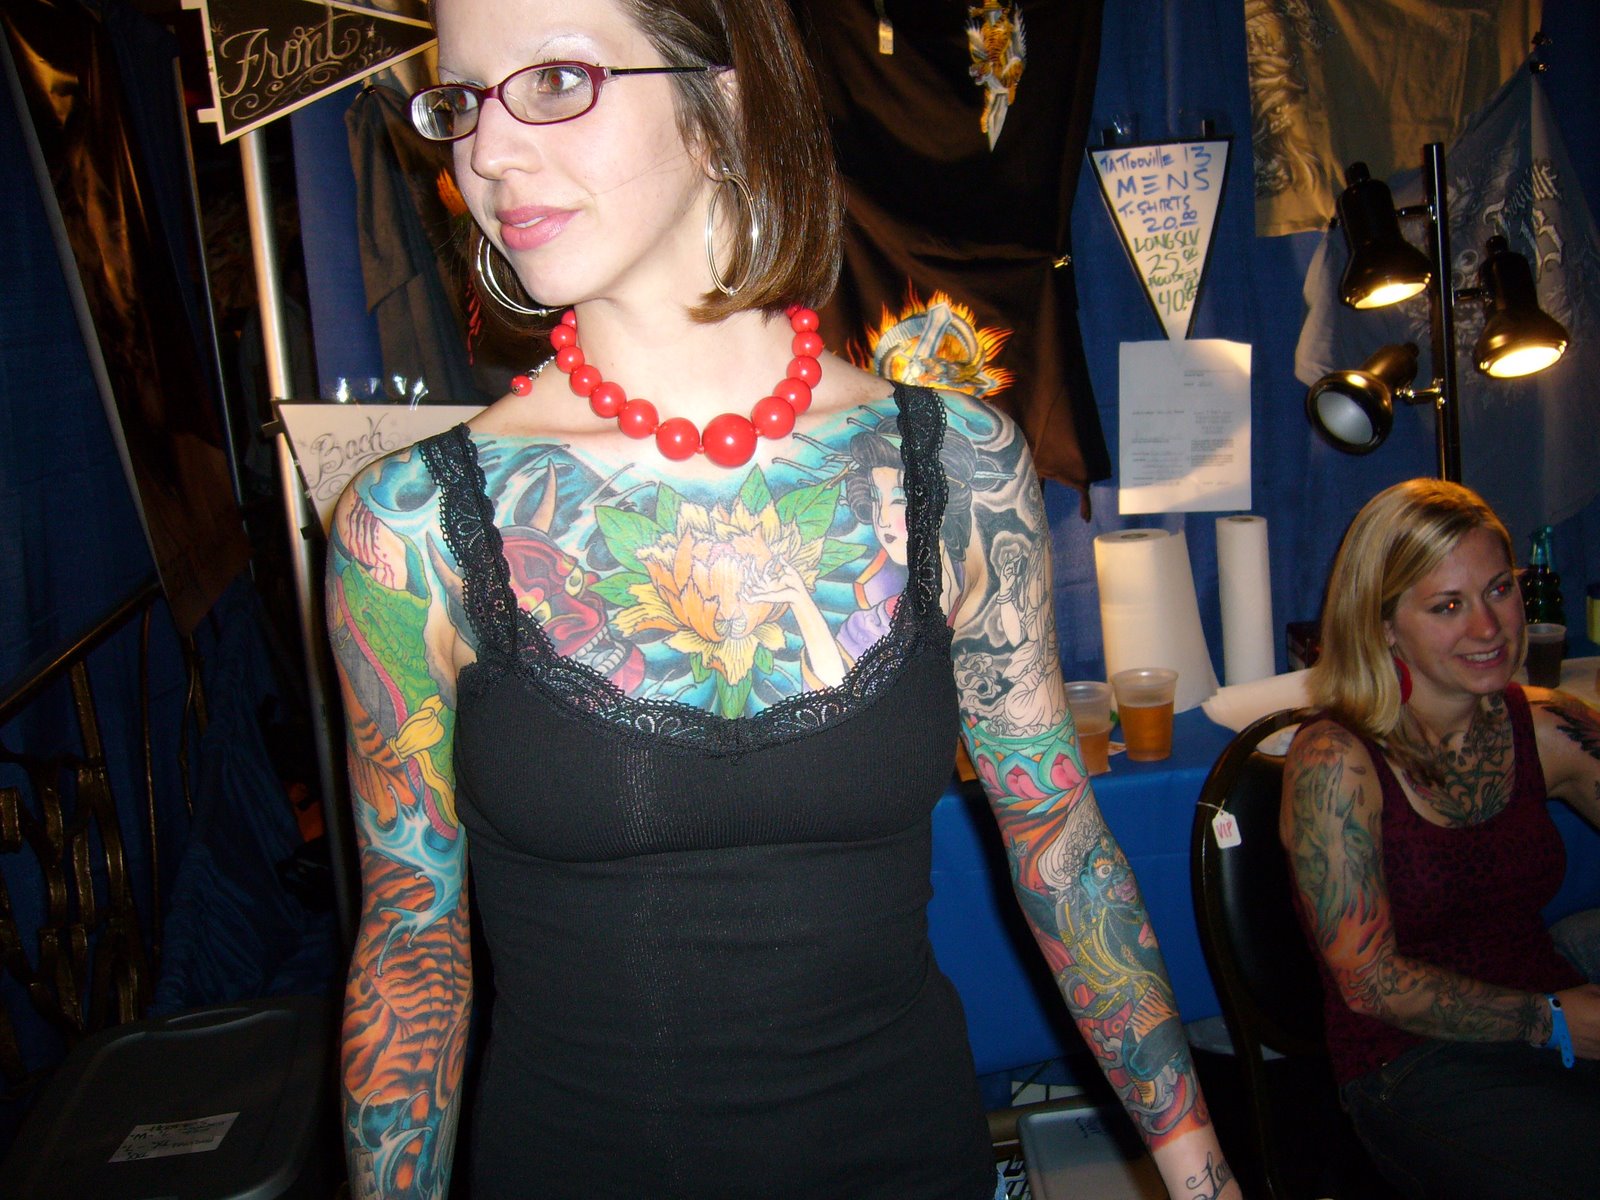 Get Perfect Look With Full Body Tattoos Designs Free Download Nude Photo Gallery